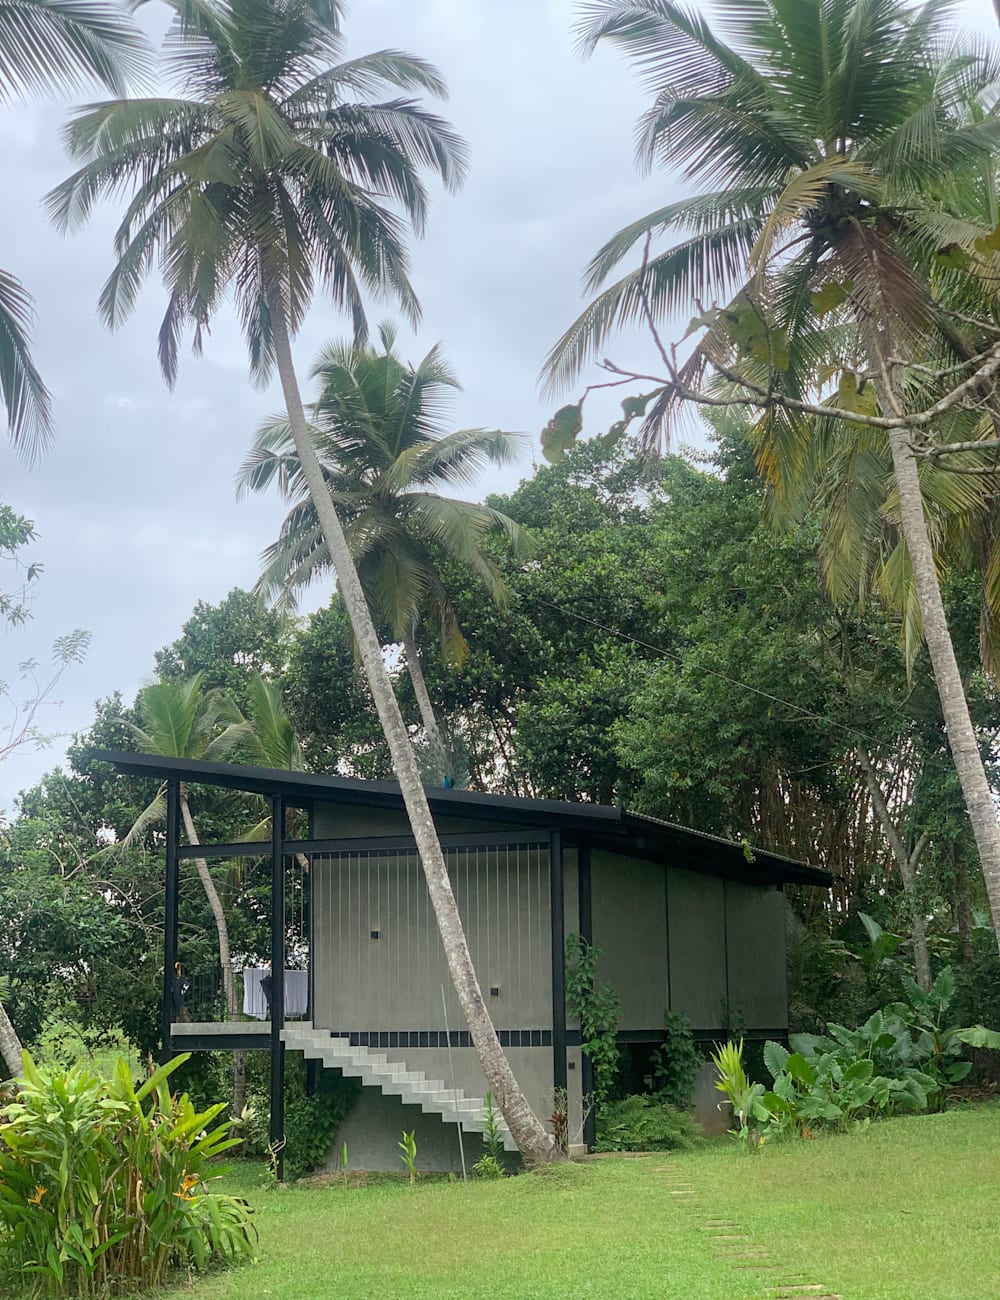 Cabin exterior with swaying palm trees